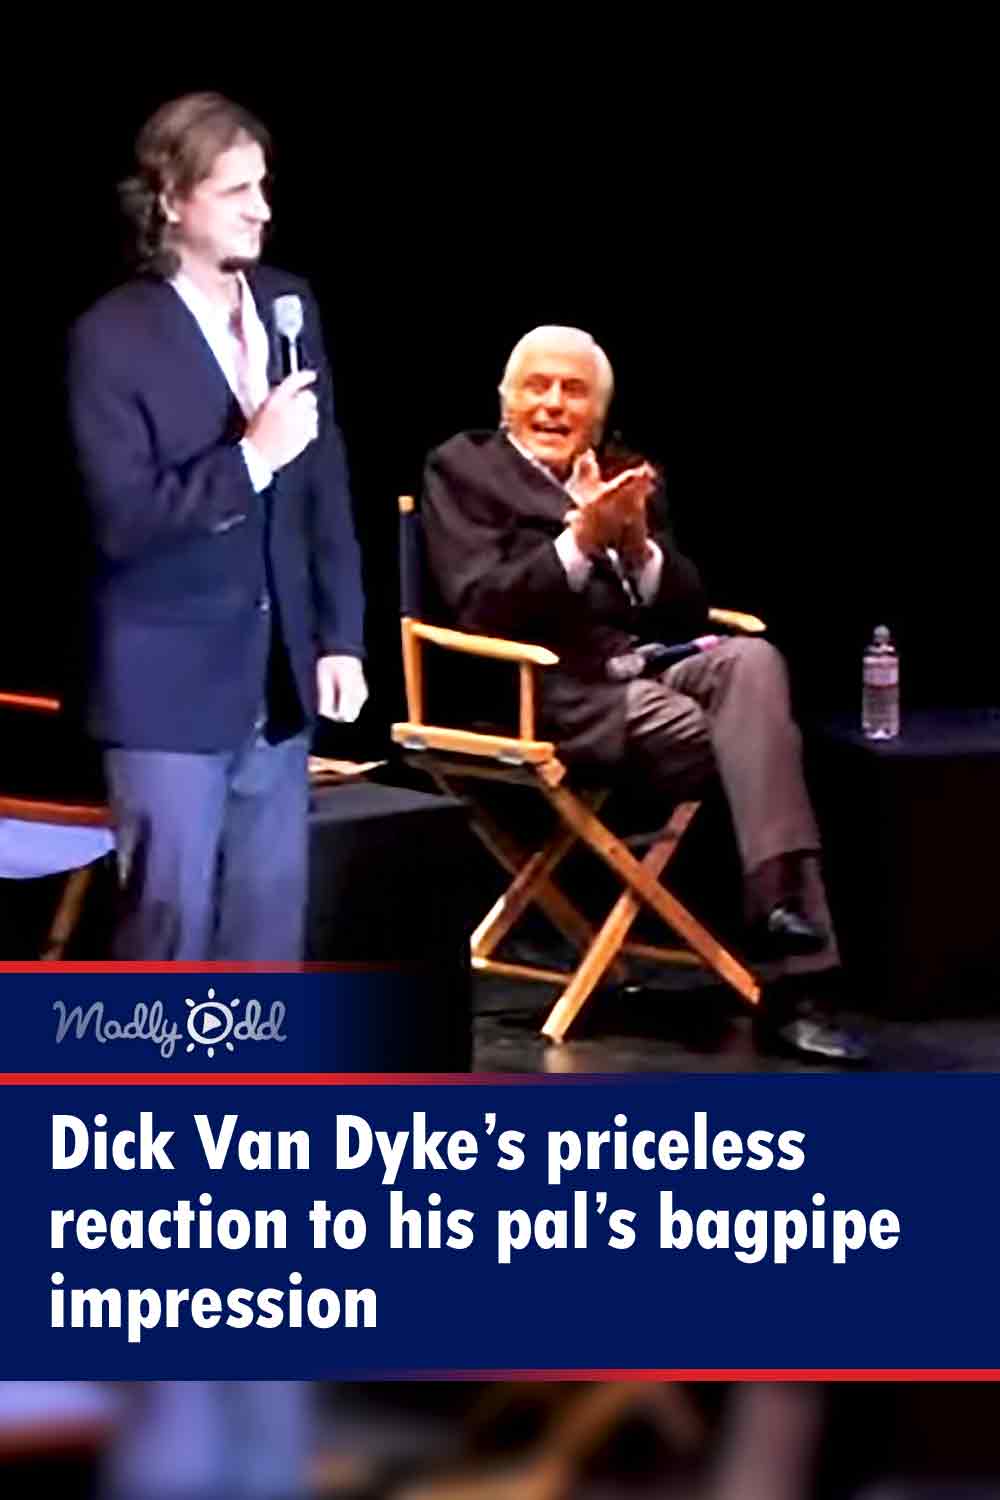 Dick Van Dyke’s priceless reaction to his pal’s bagpipe impression